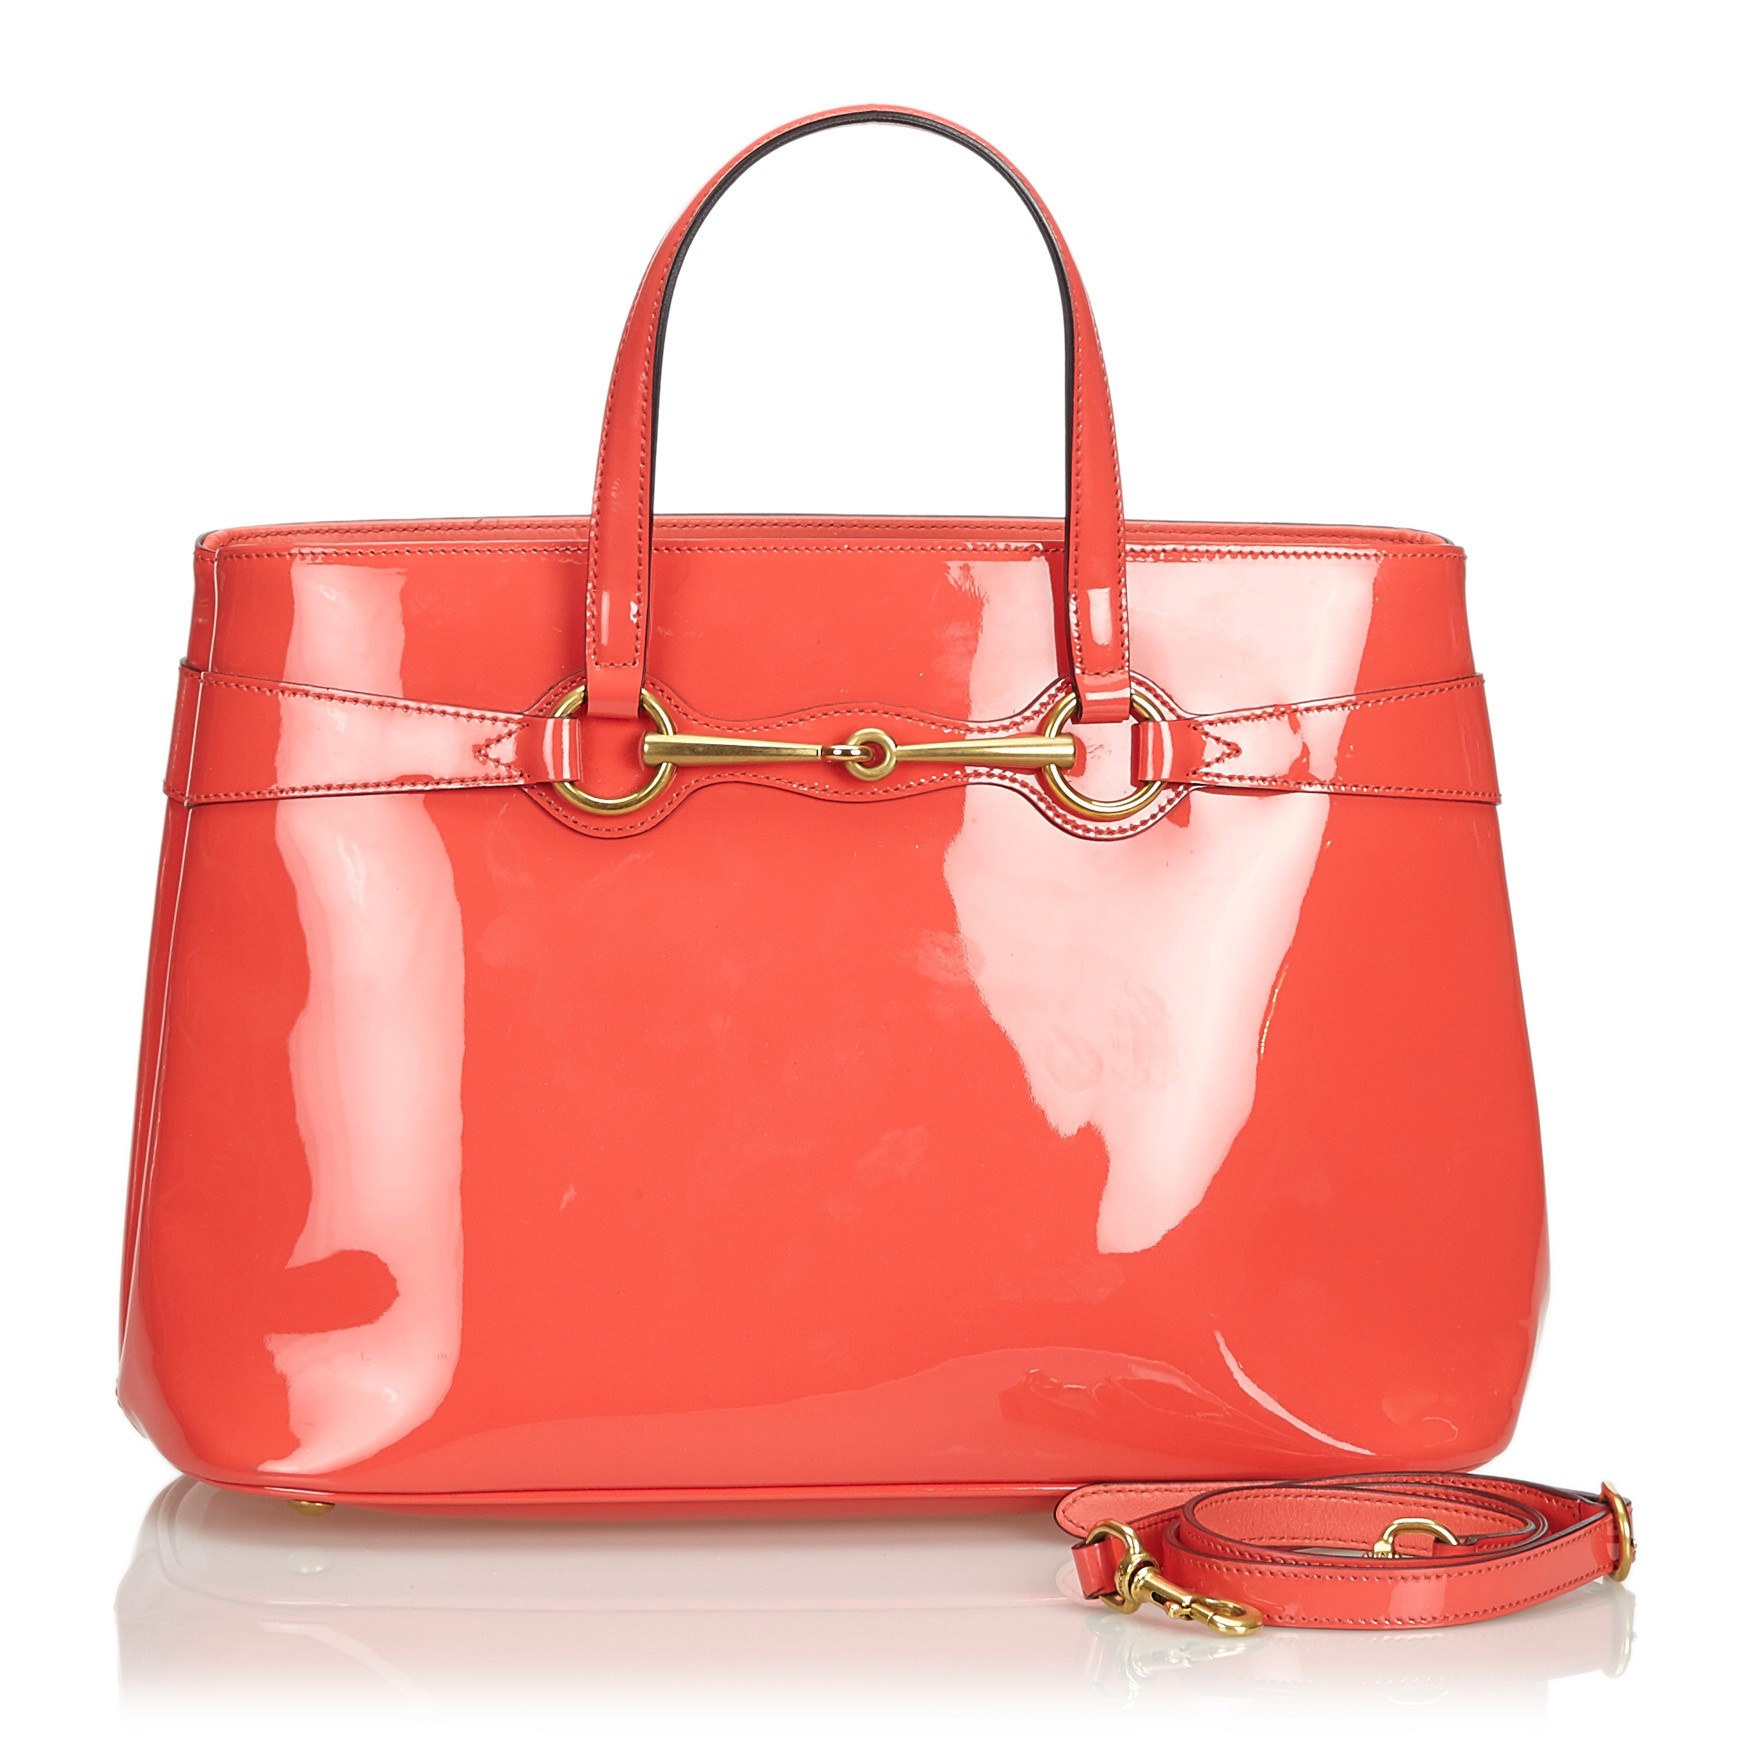 gucci red patent leather bag